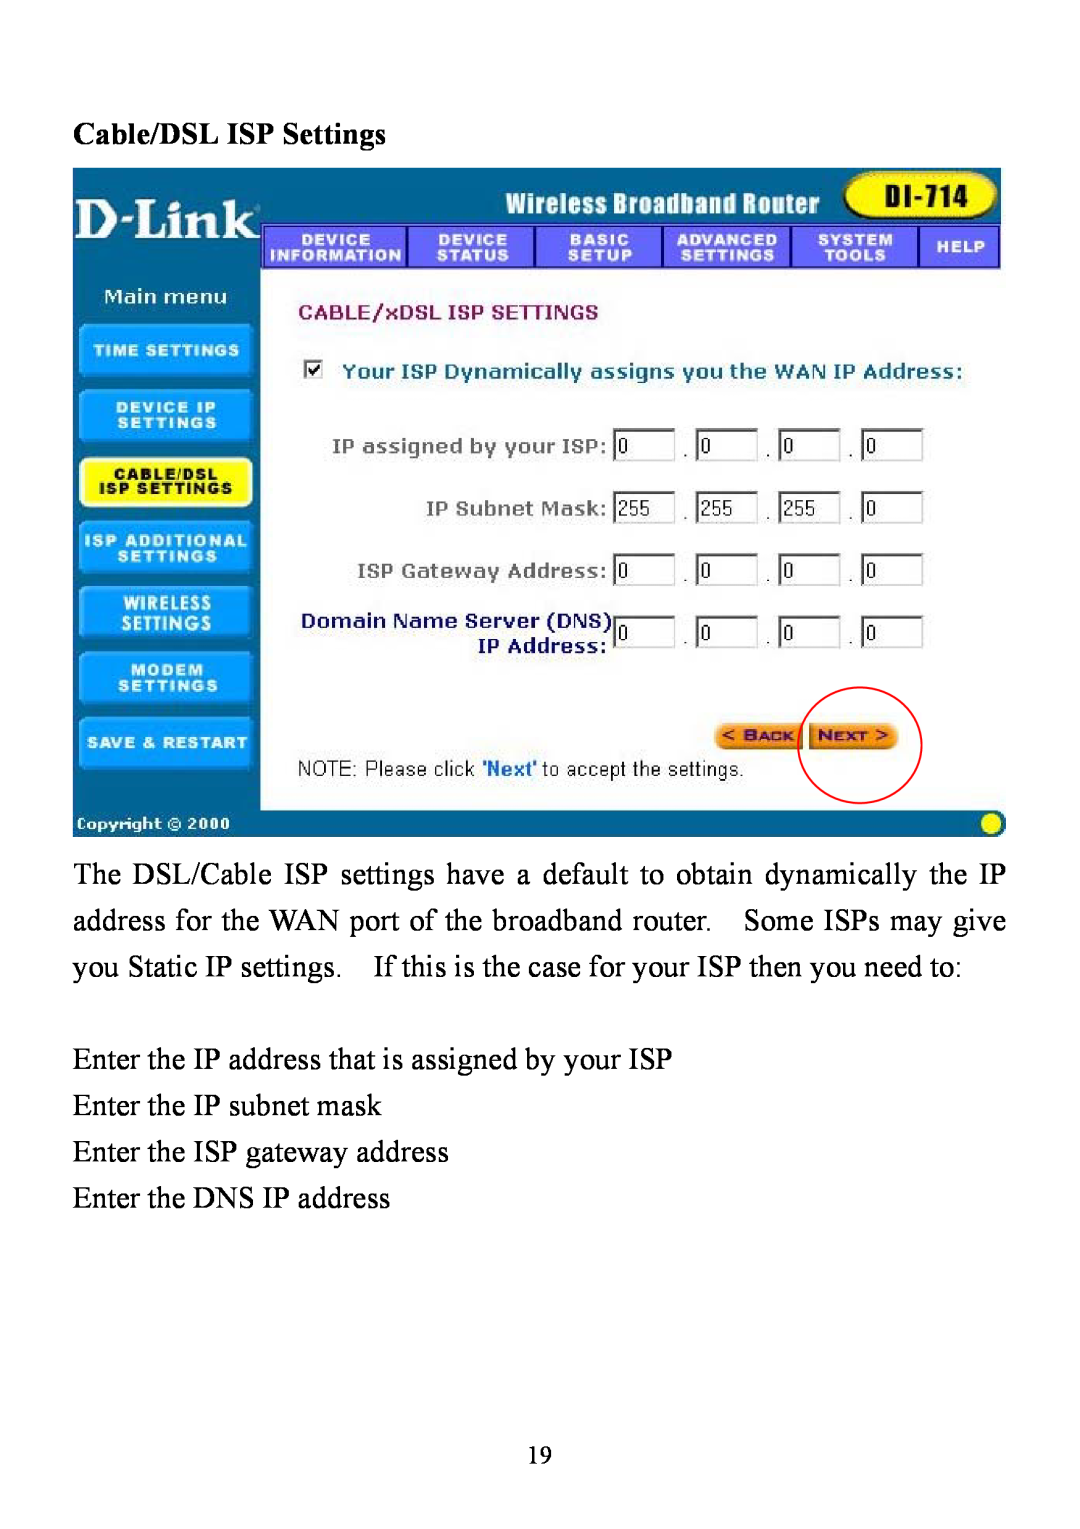 D-Link DI-714 Cable/DSL ISP Settings, Enter the IP address that is assigned by your ISP, Enter the DNS IP address 